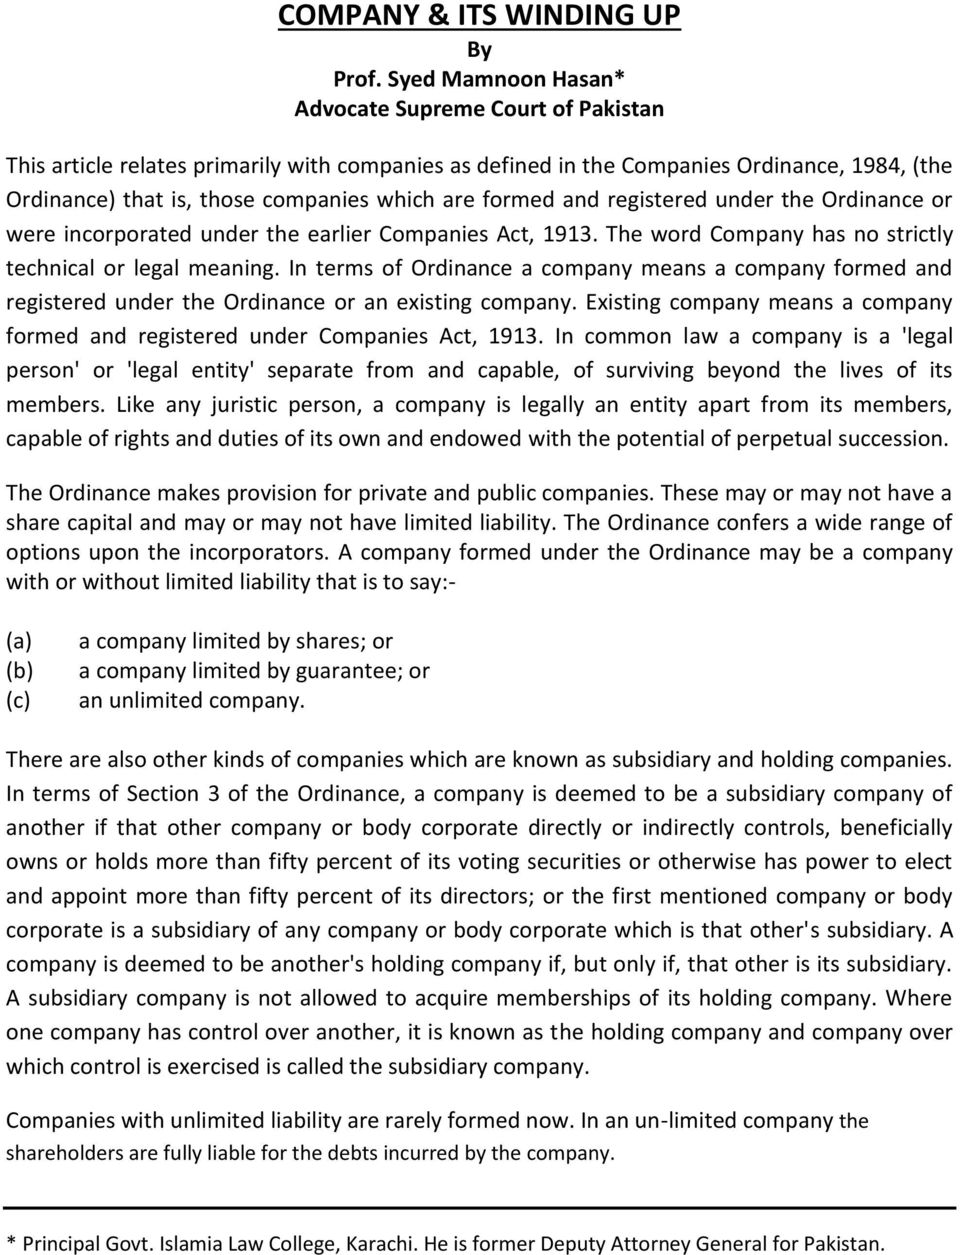 formed and registered under the Ordinance or were incorporated under the earlier Companies Act, 1913. The word Company has no strictly technical or legal meaning.